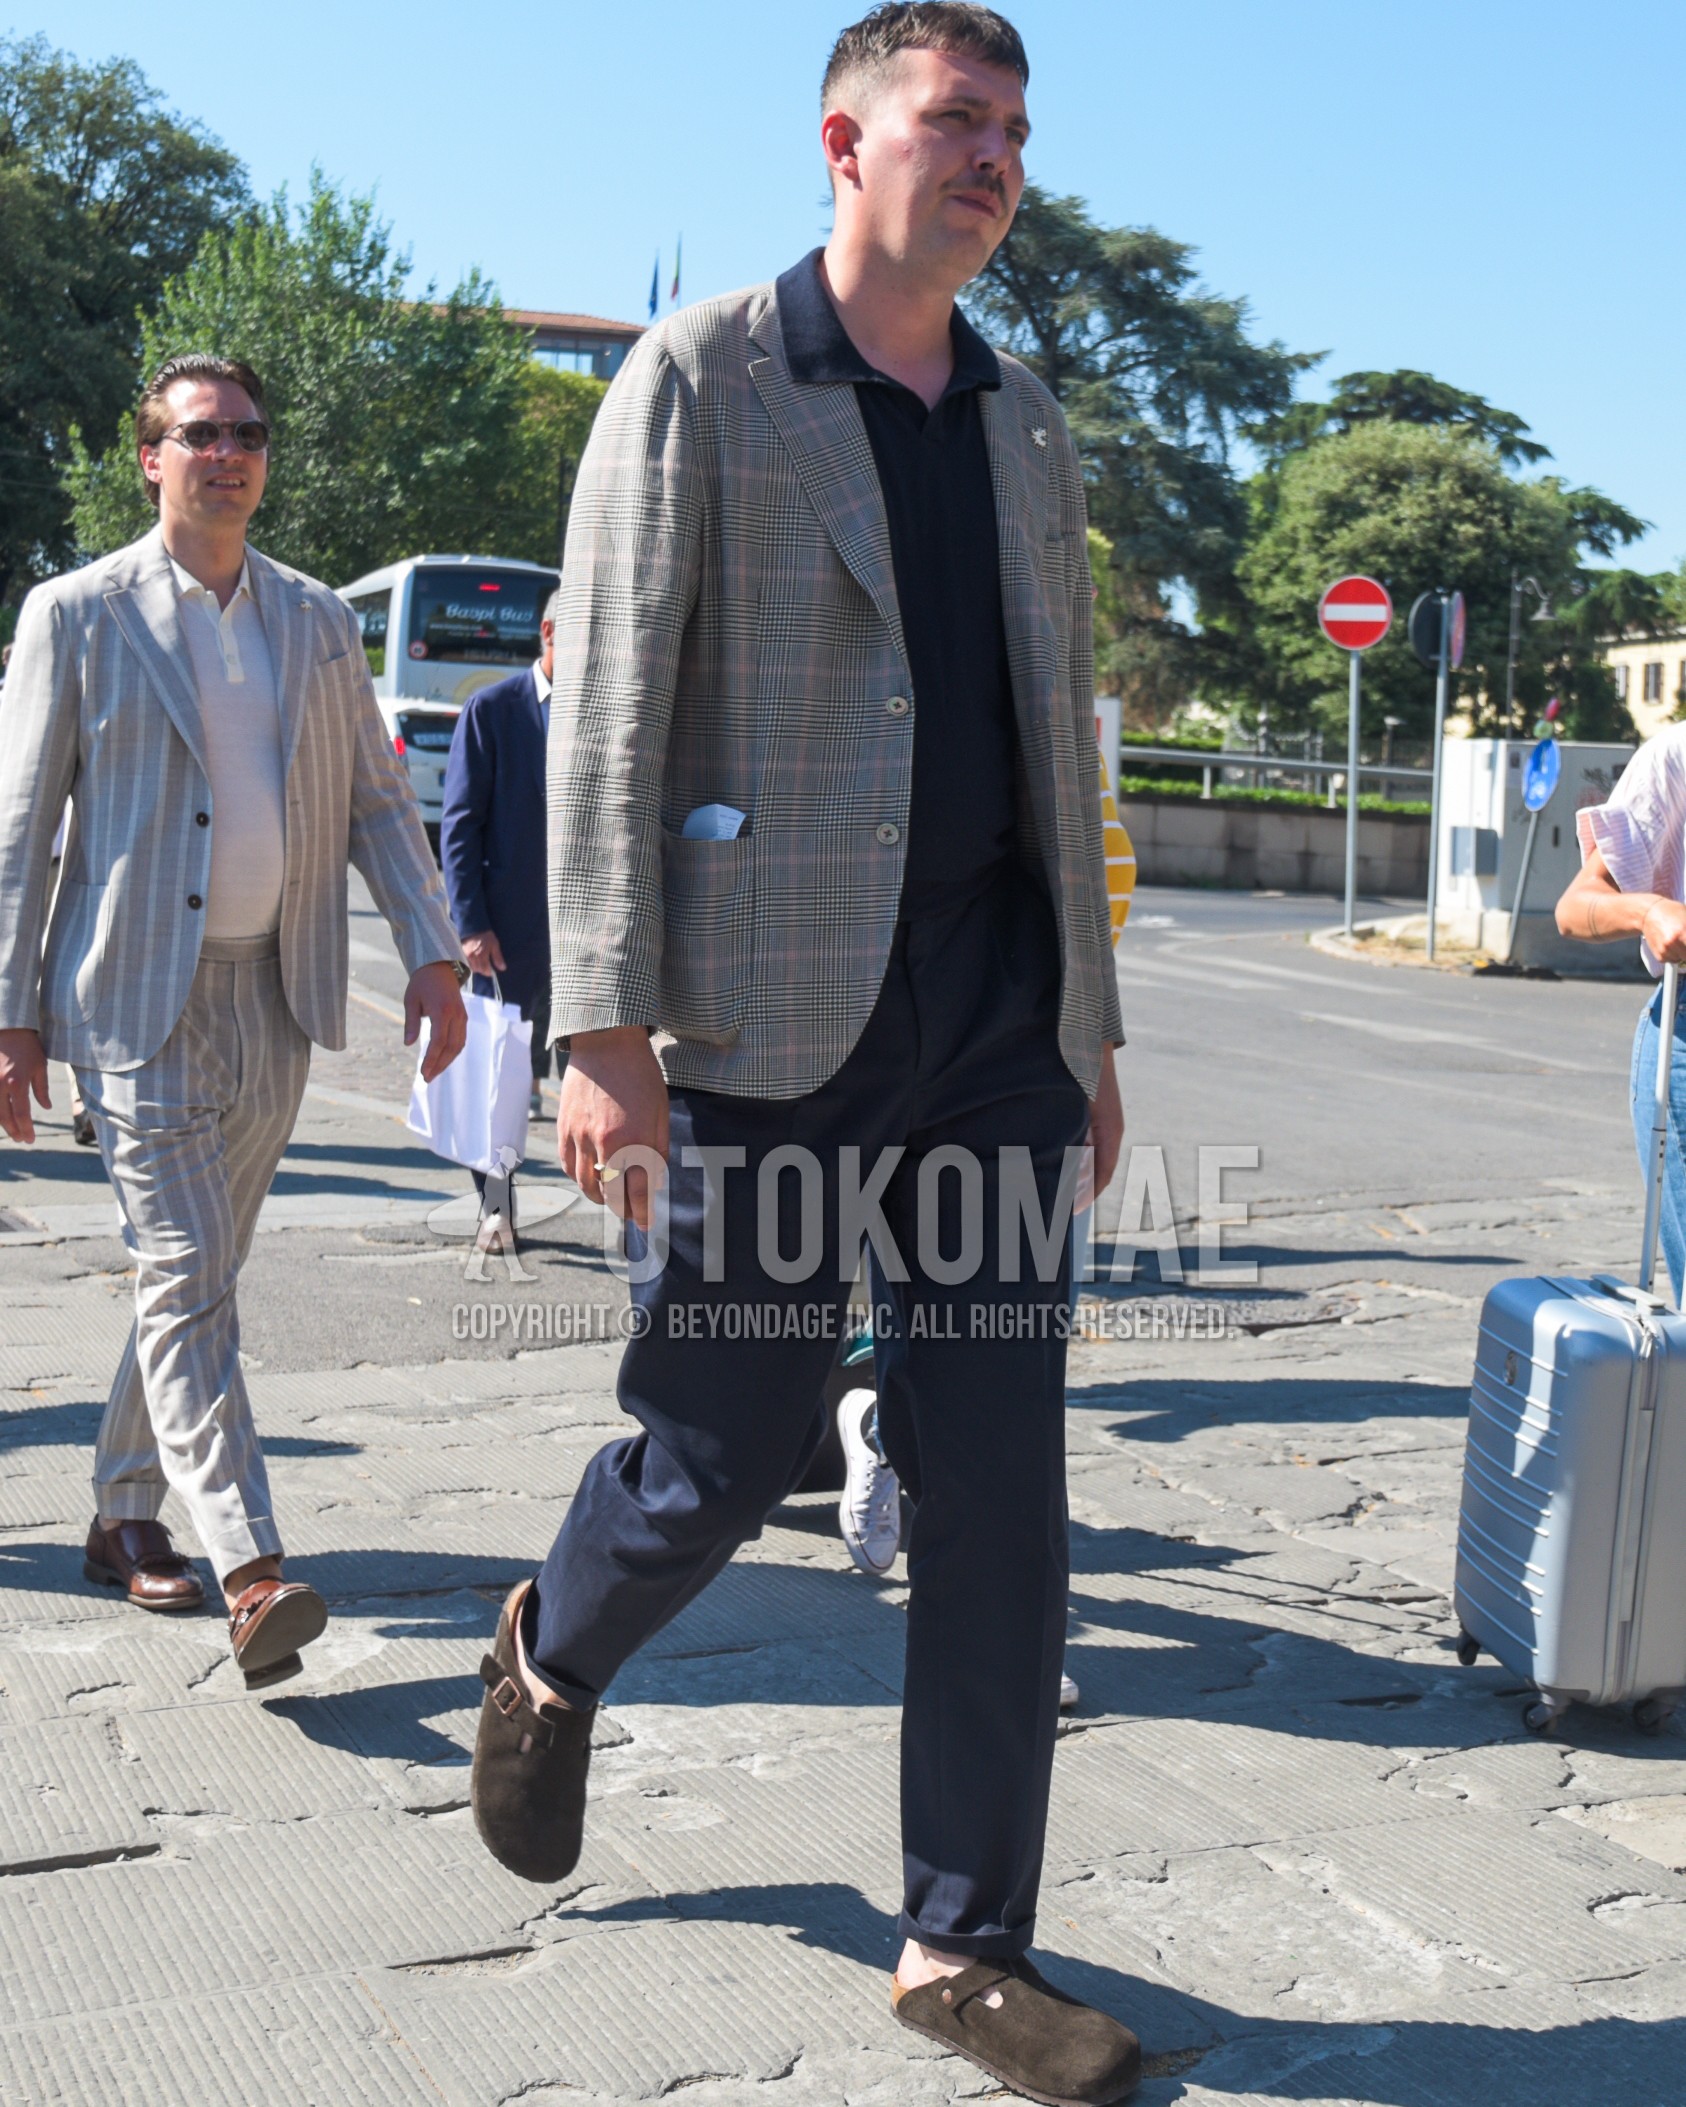 Men's spring summer outfit with gray check tailored jacket, black plain t-shirt, navy plain slacks, brown leather sandals.